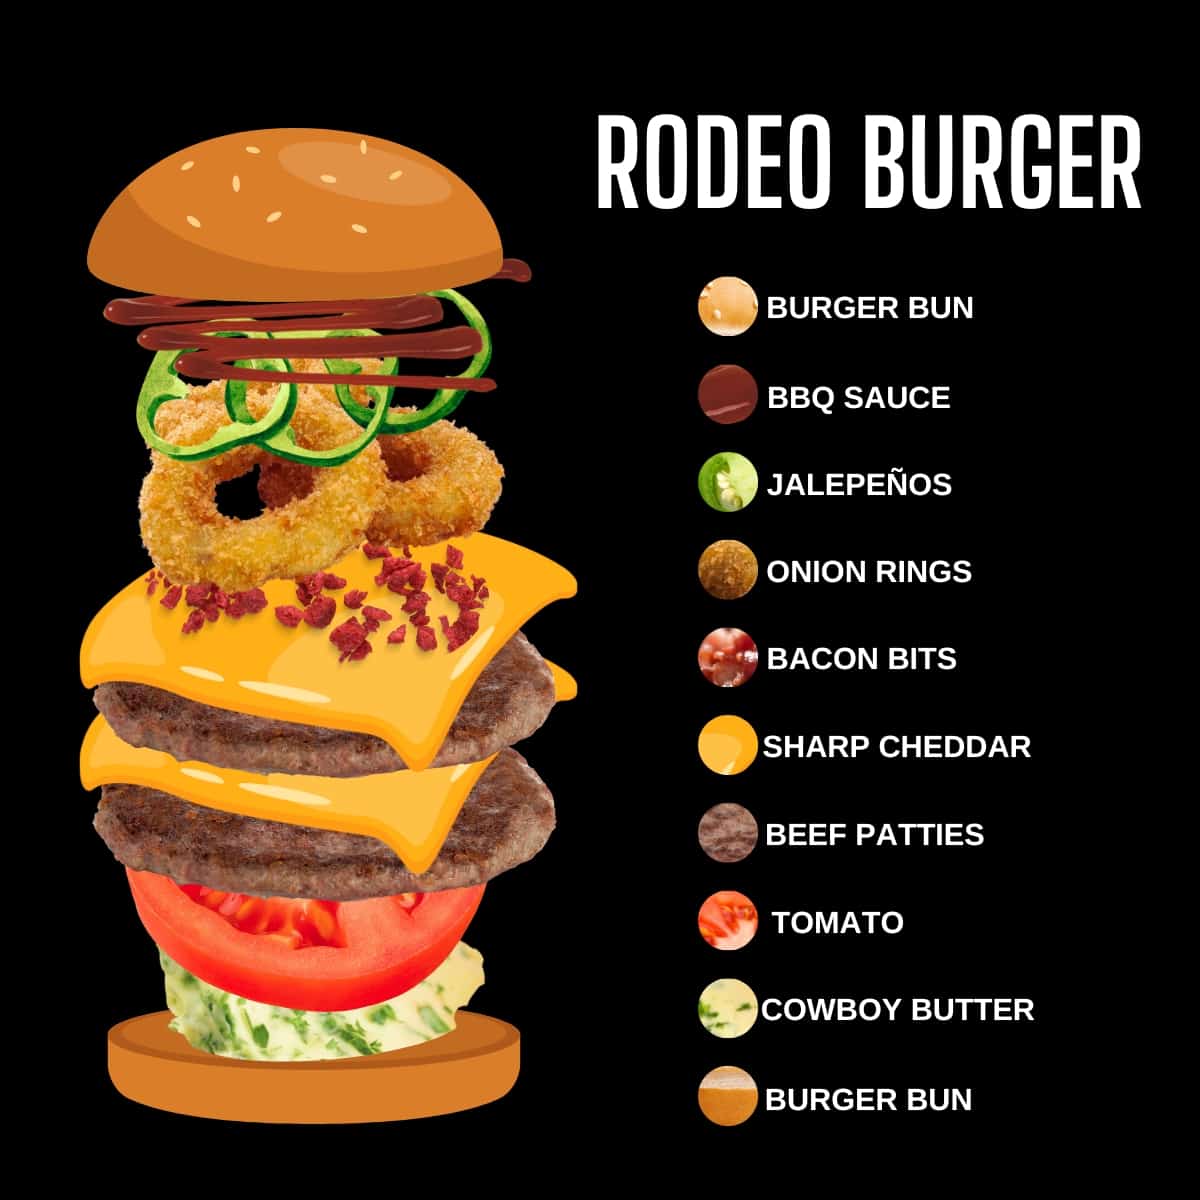 Individual Ingredients for a Rodeo Burger by iamhomesteader.com.